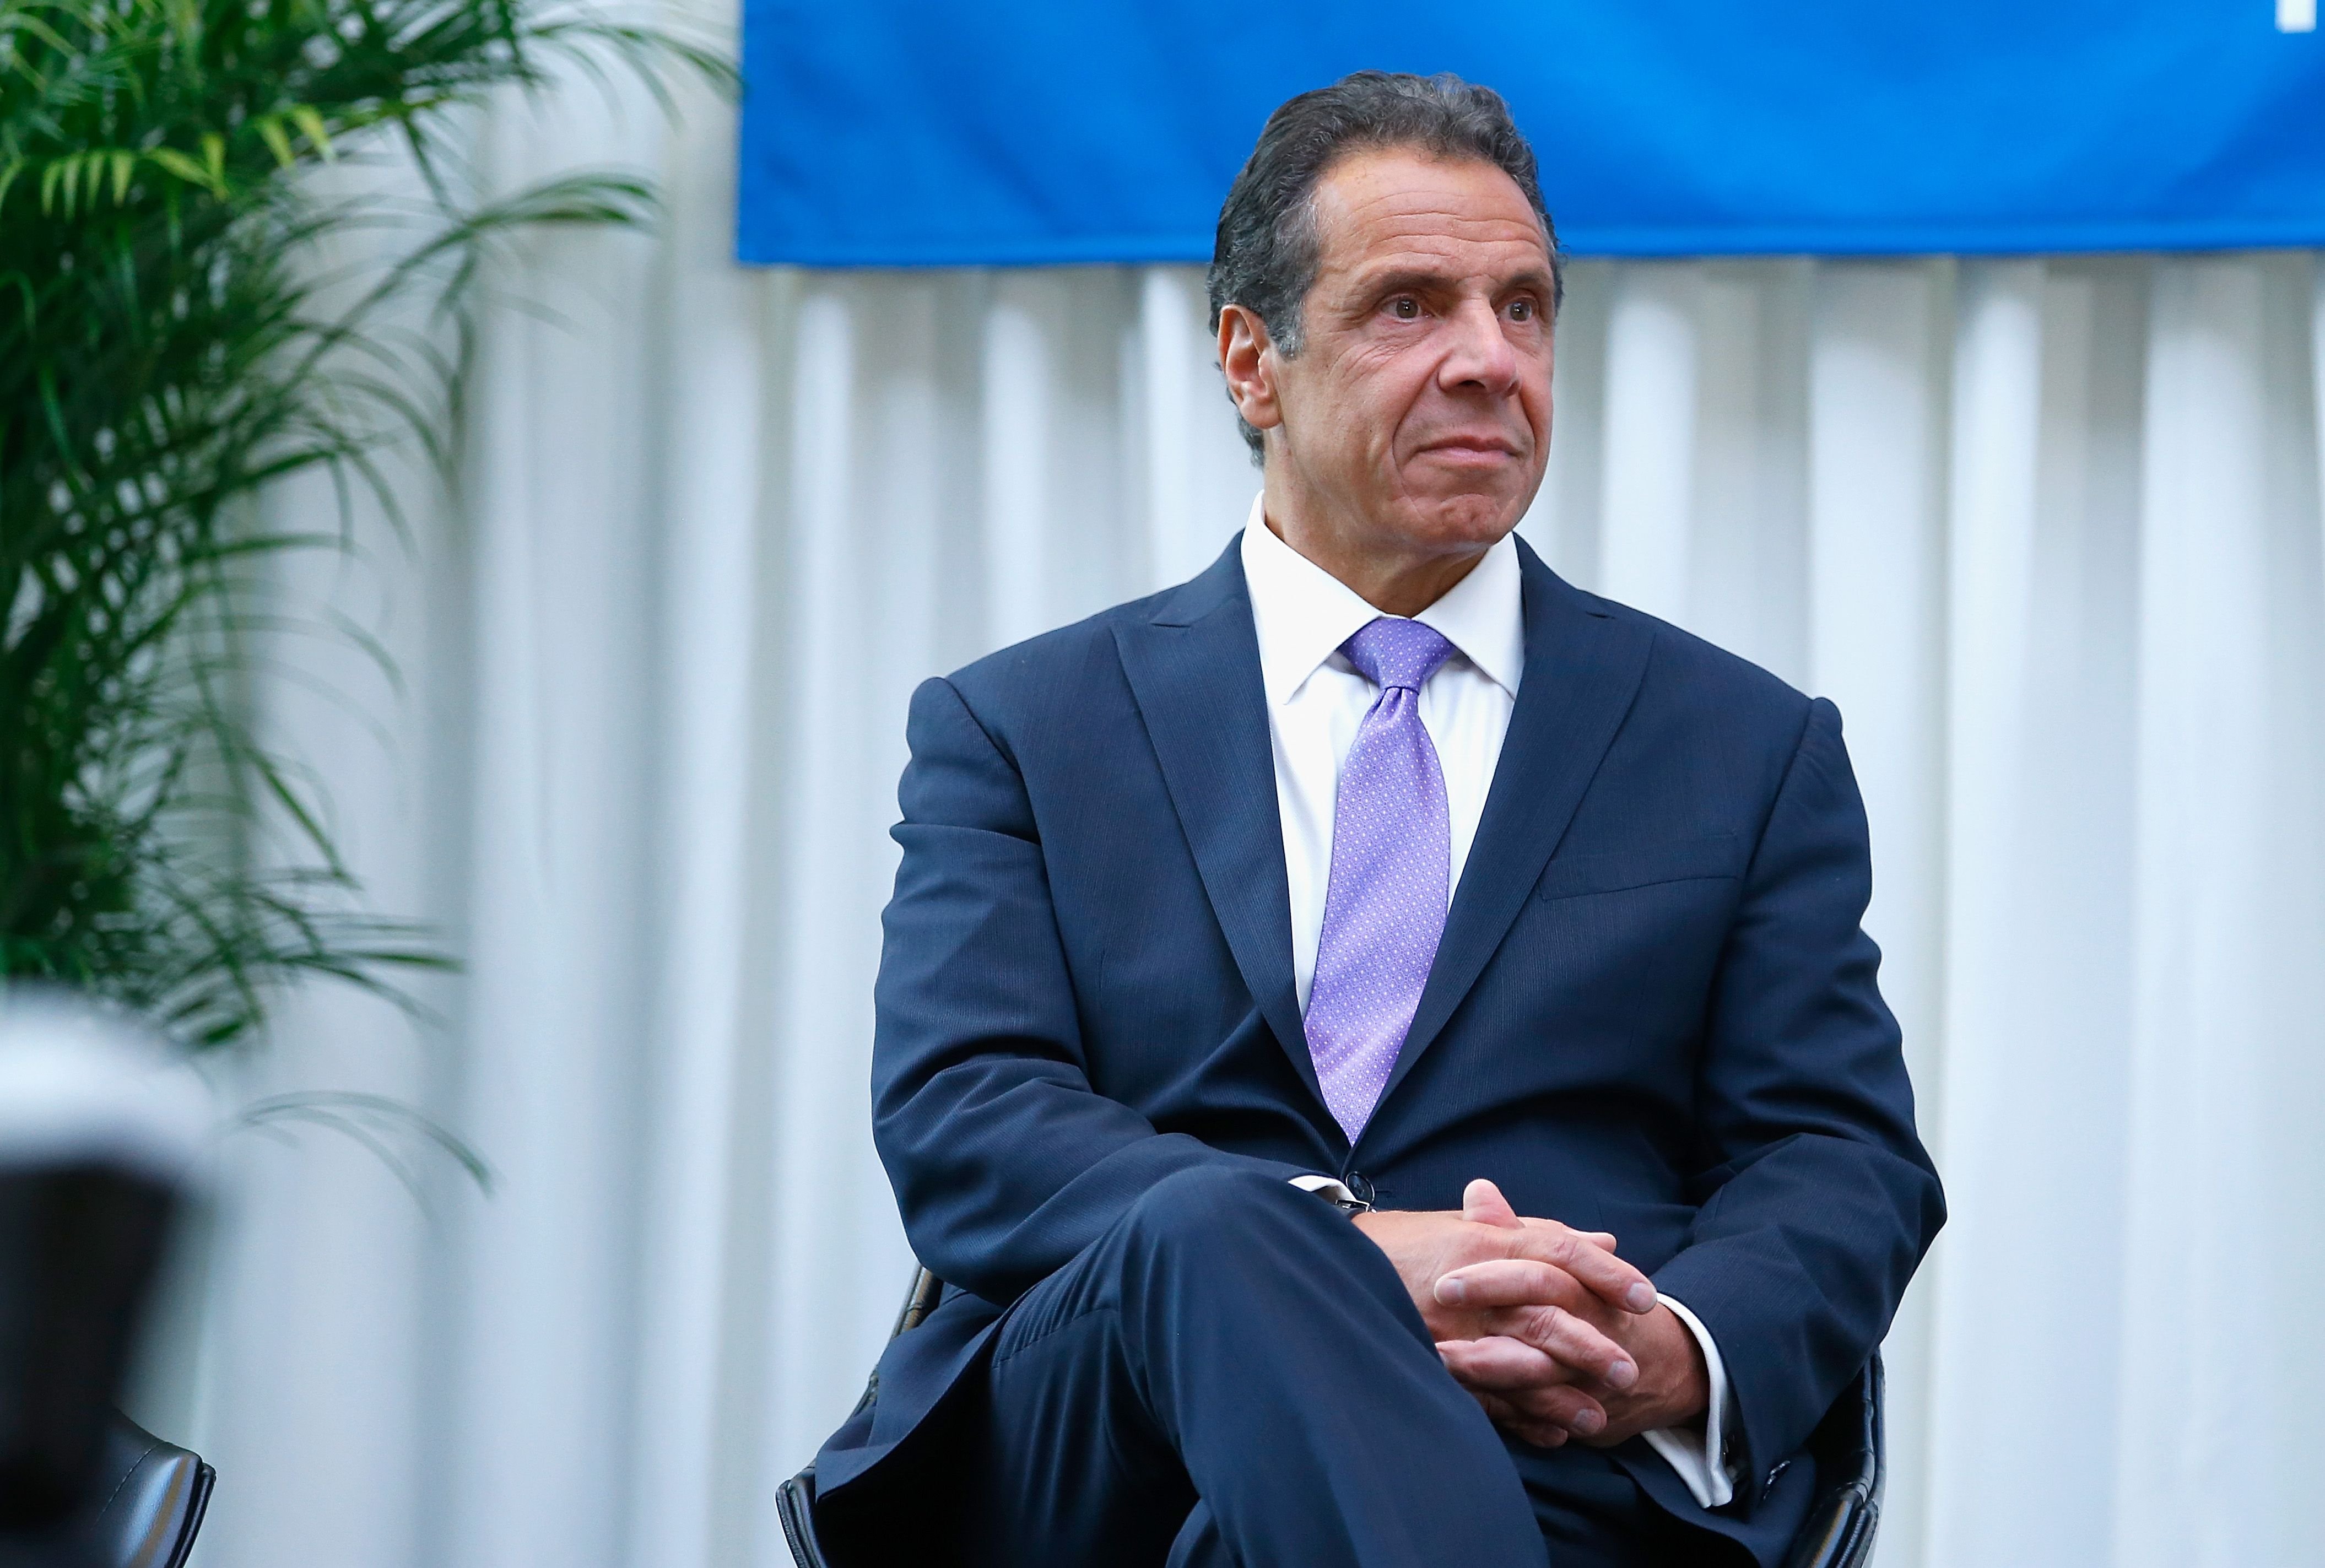 Andrew Cuomo at the Madison Square Garden celebration of Billy Joel's 100th lifetime show on July 18, 2018 | Photo: Getty Images